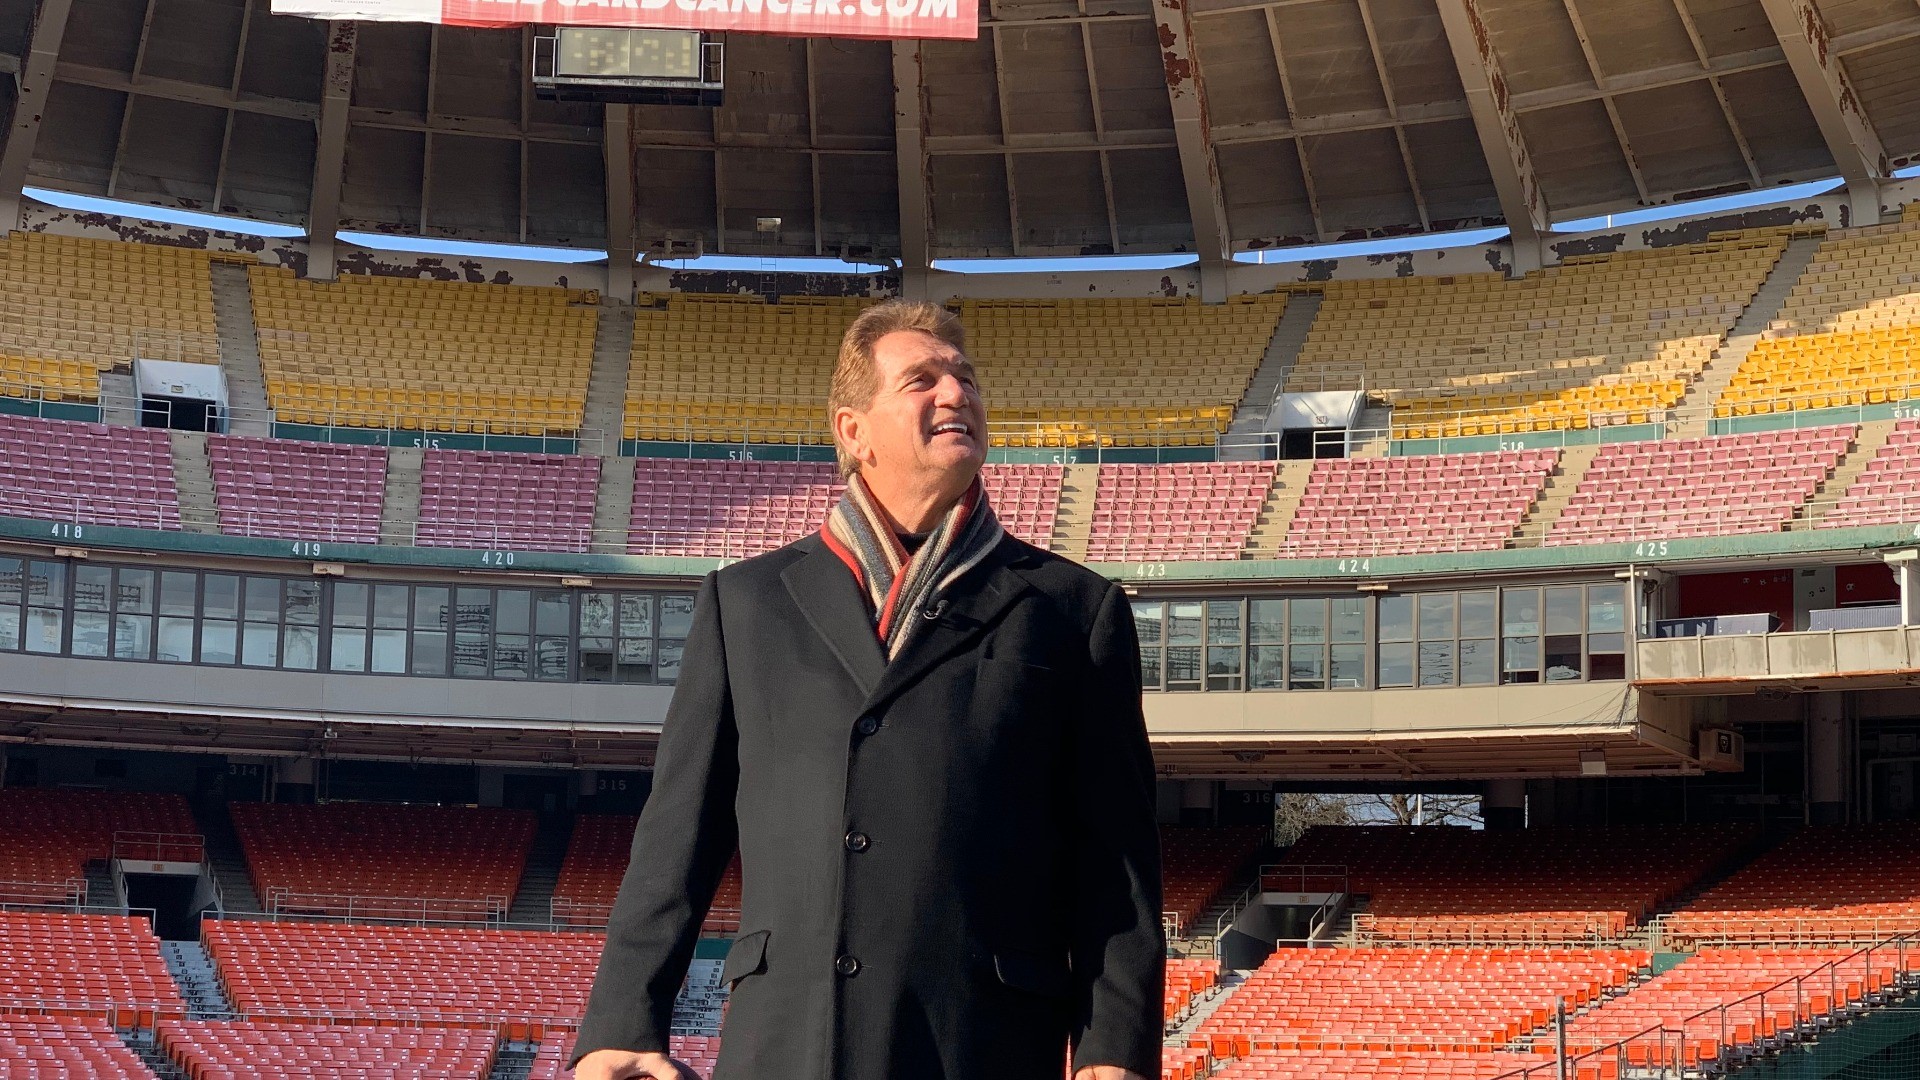 WARNING GRAPHIC VIDEO: Joe Theismann led the Washington Redskins to two Super Bowls, but one fateful Monday night game brought his NFL career to a violent end.